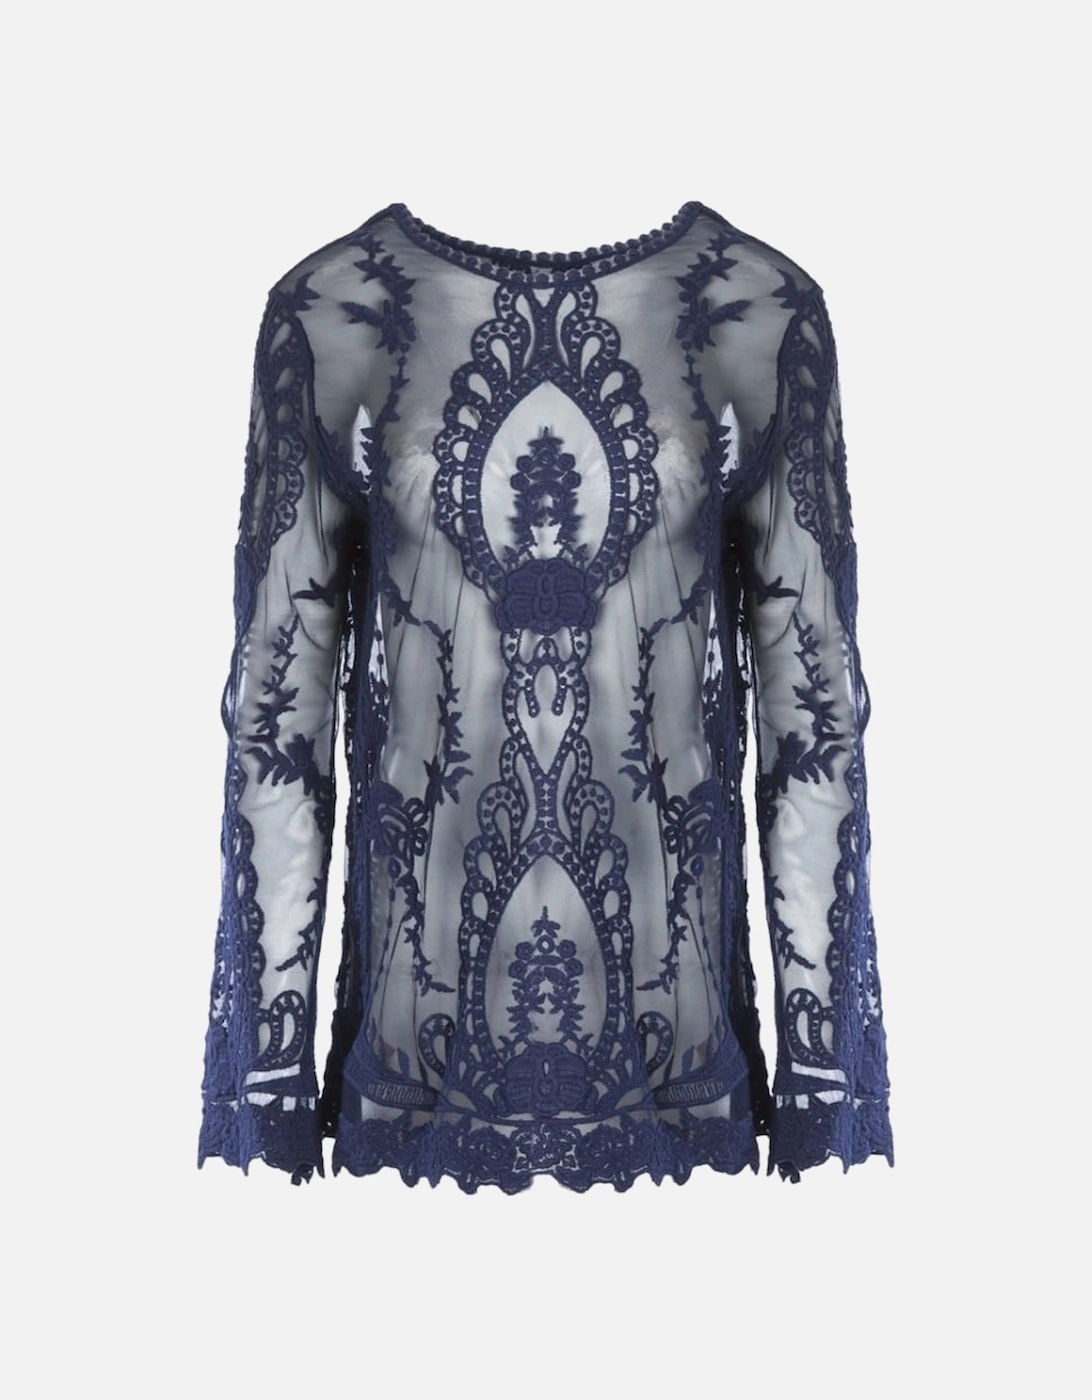 Blue Vintage Inspired Lace Long Sleeved Top